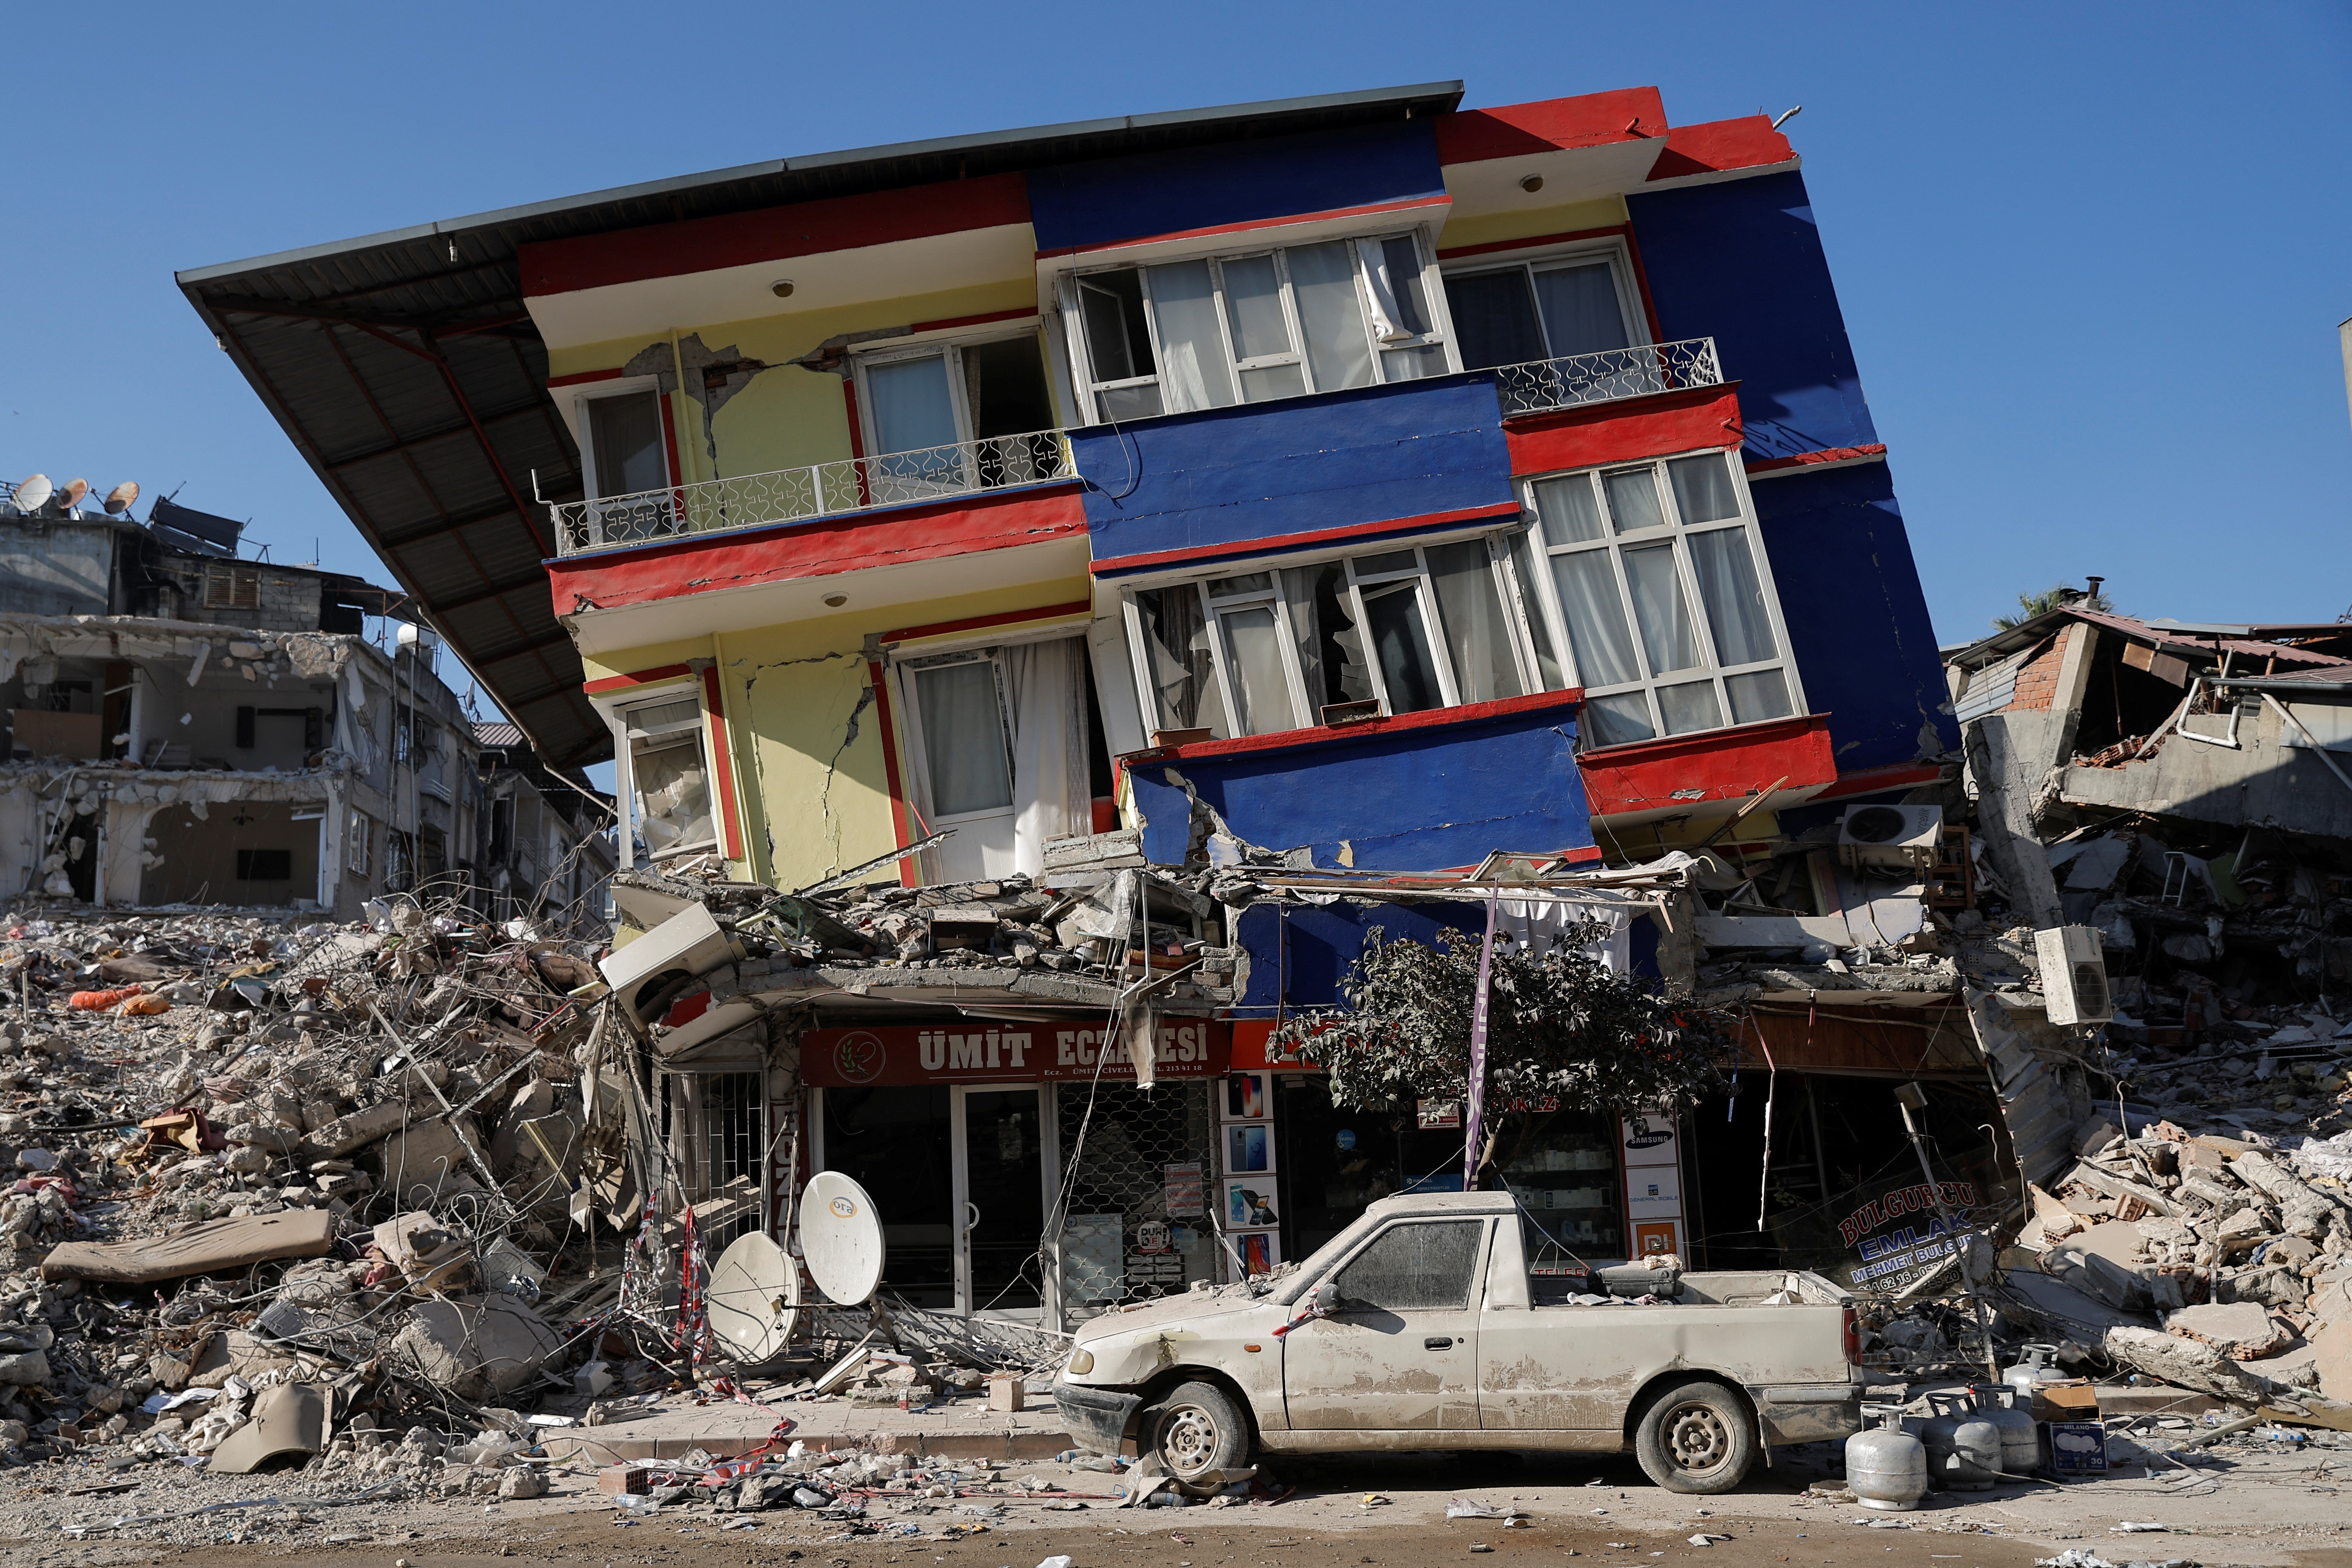 A view shows a destroyed building, in the aftermath of the deadly earthquake, in Antakya, Turkey February 18, 2023. Photo: Reuters